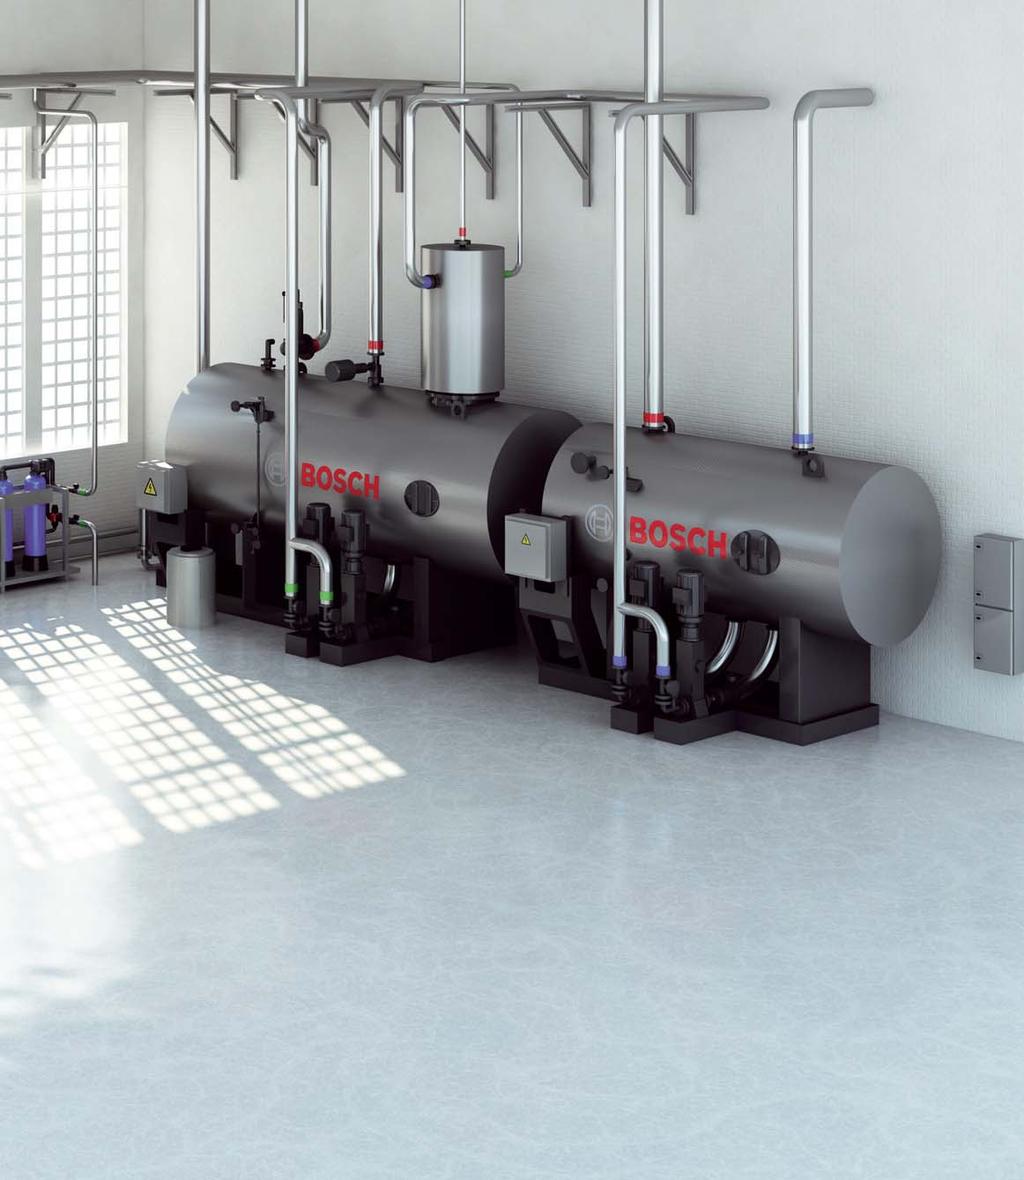 Energy saving solutions for steam boilers 9 Water treatment higher water quality improved steam quality lower desalting rate Condensate systems up to 12 % fuel saving make-up/raw water saving waste